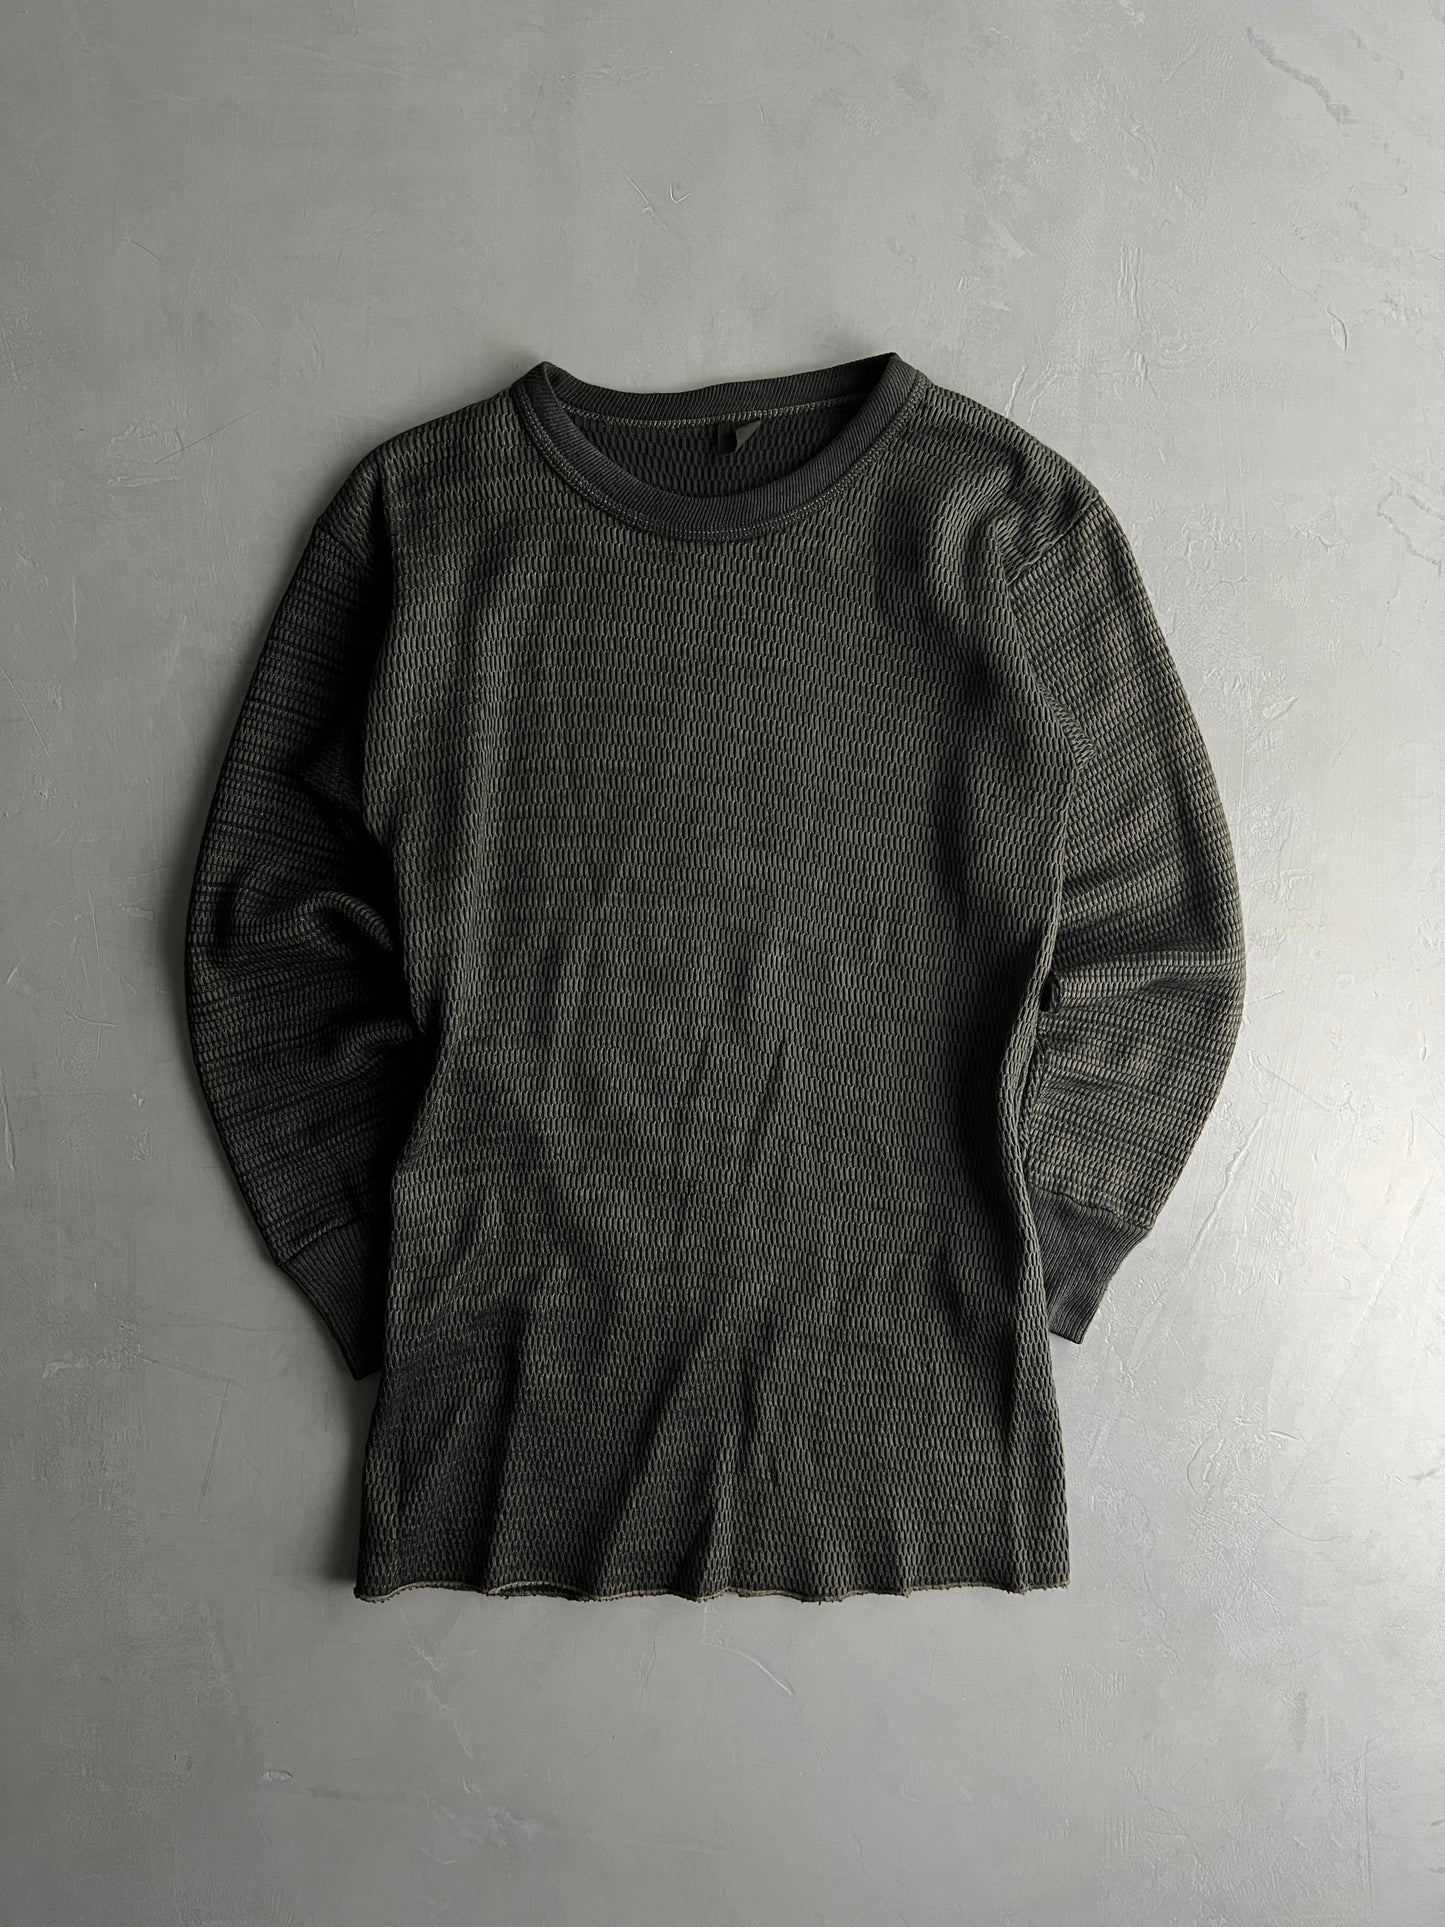 Overdyed Thermal [S/M]